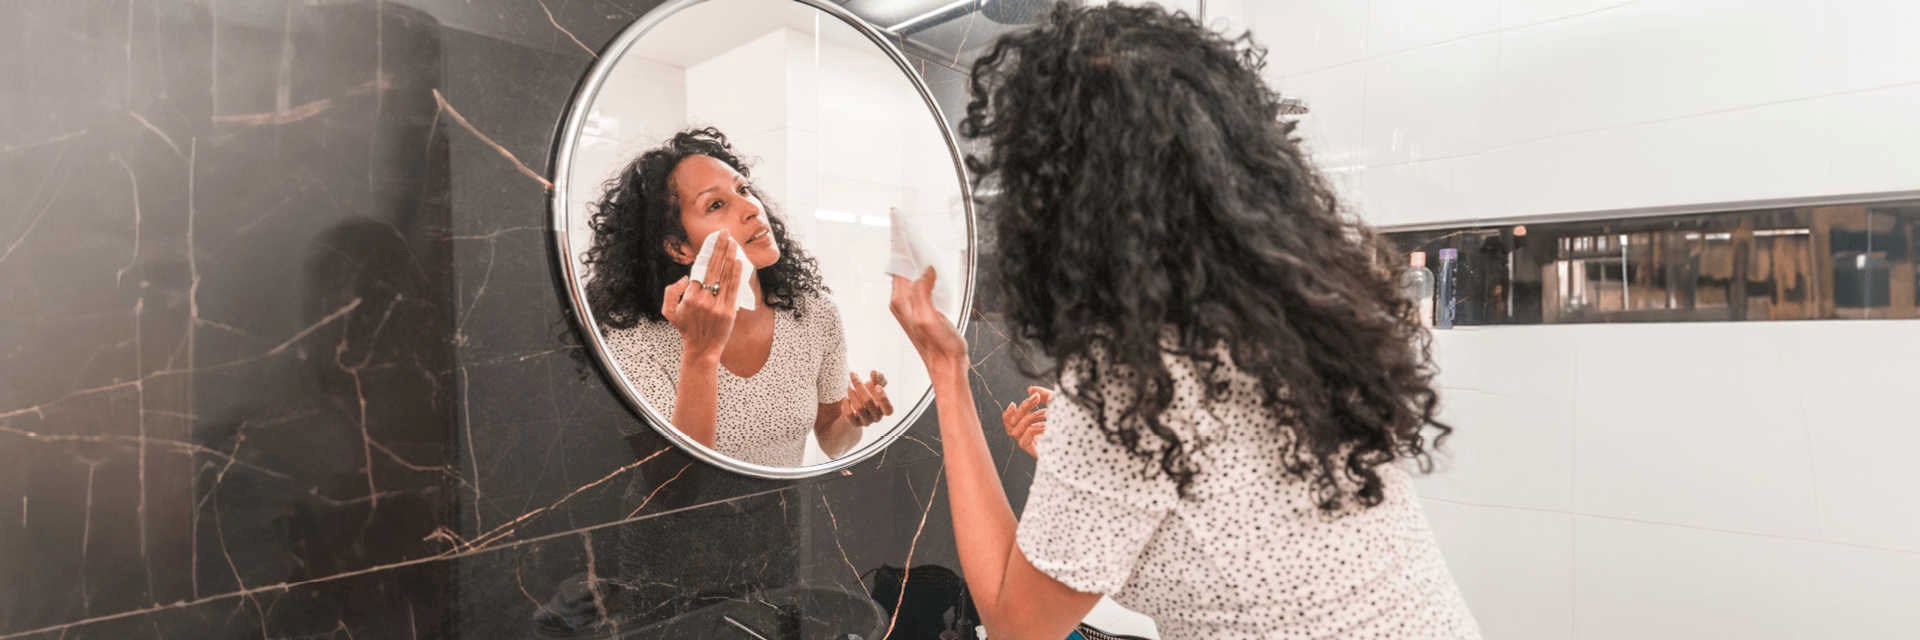 Woman cleansing her face in the mirror